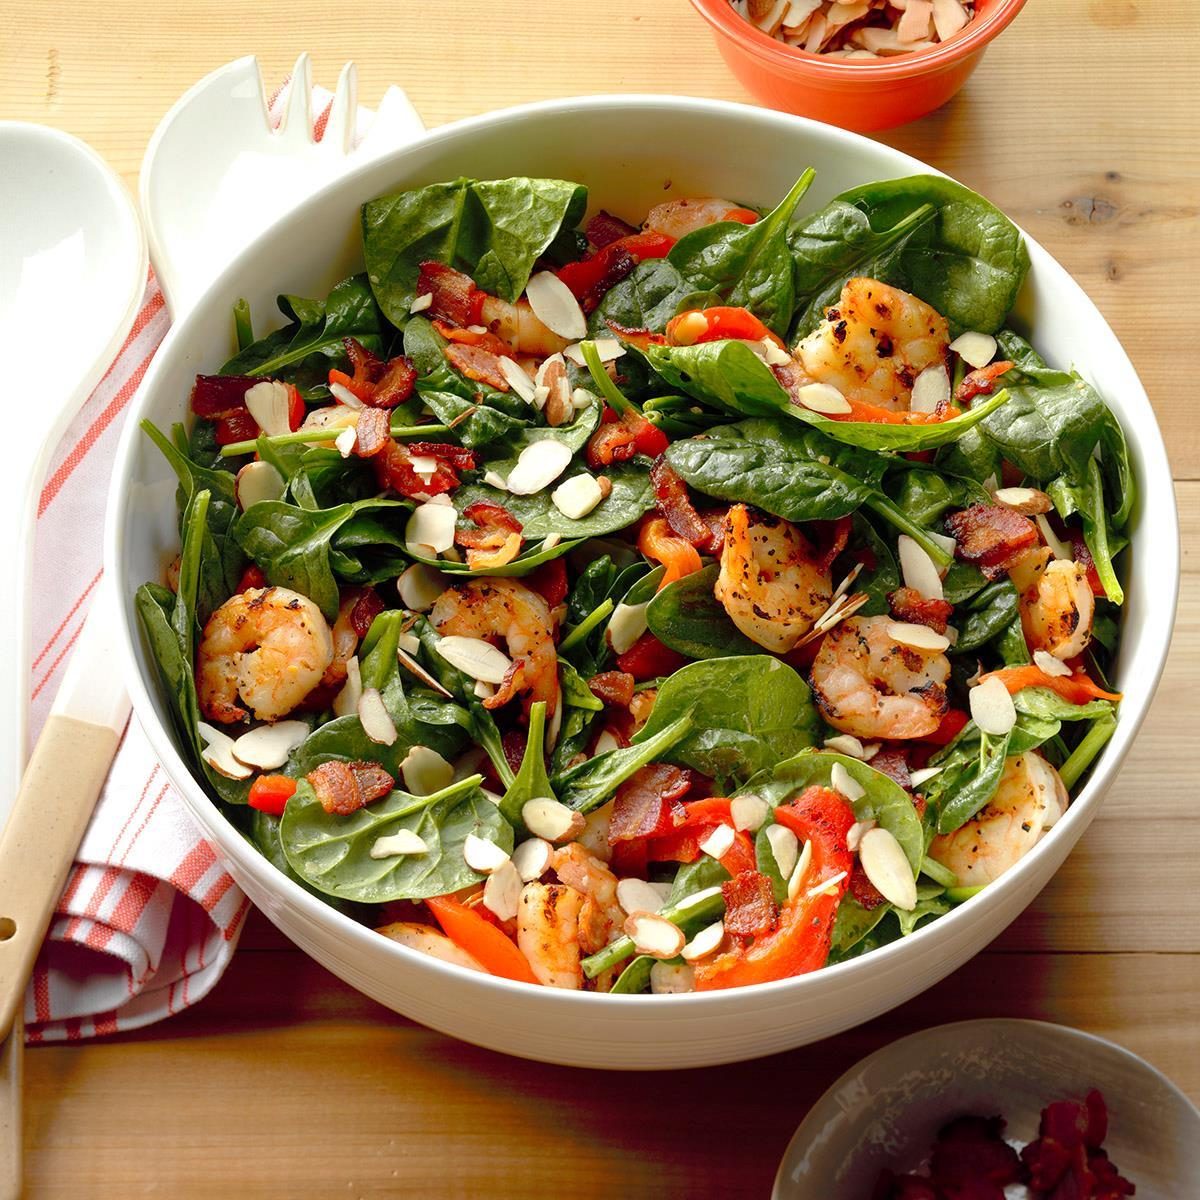 Day 26: Shrimp and Spinach Salad with Hot Bacon Dressing